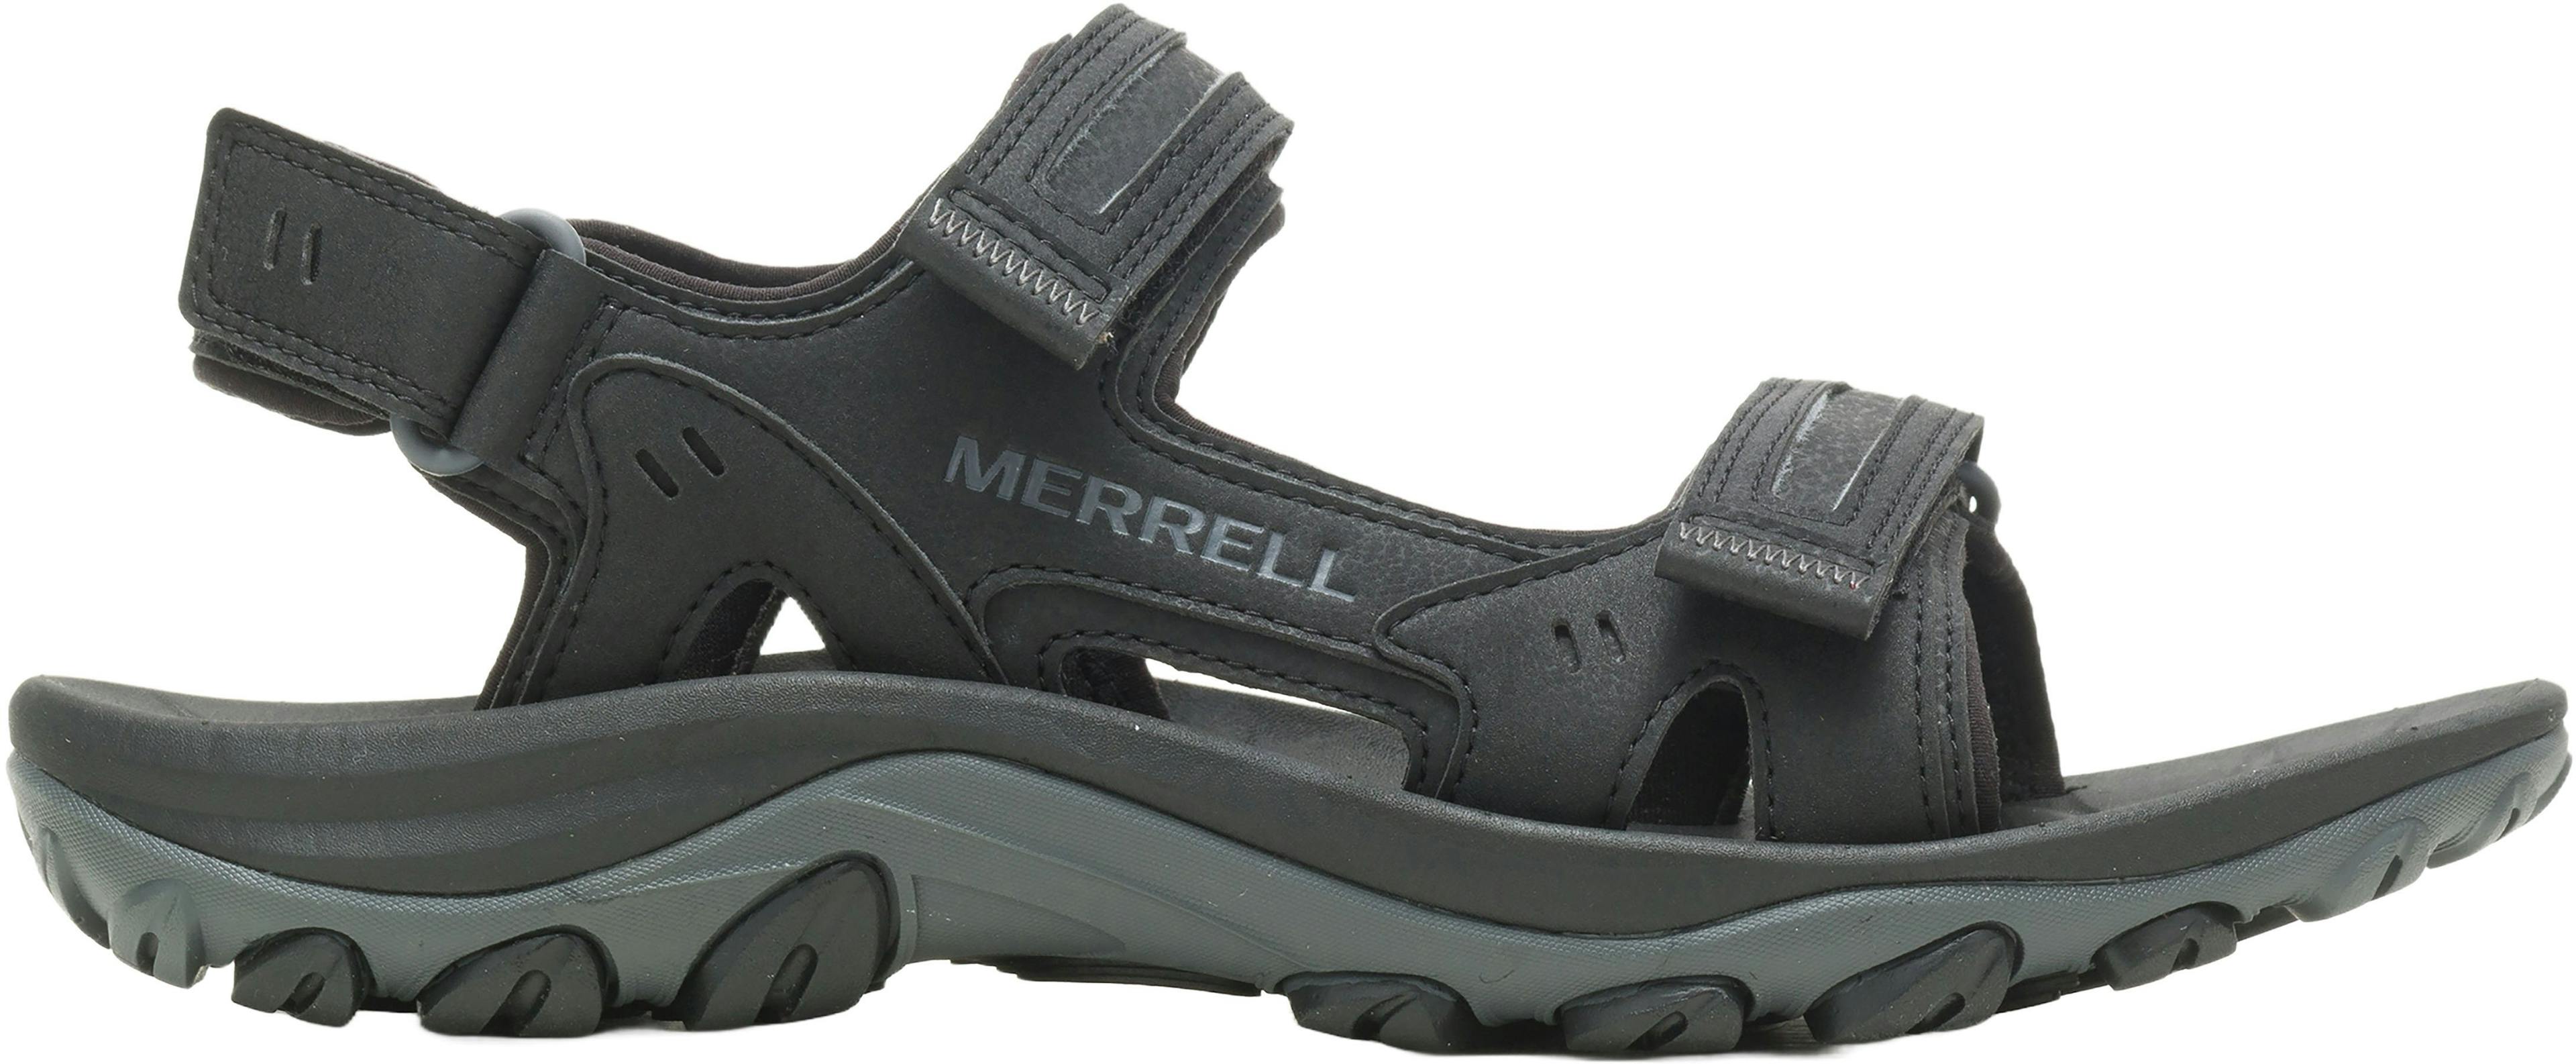 Product image for Huntington Sport Convertible Hiking Sandals - Men's